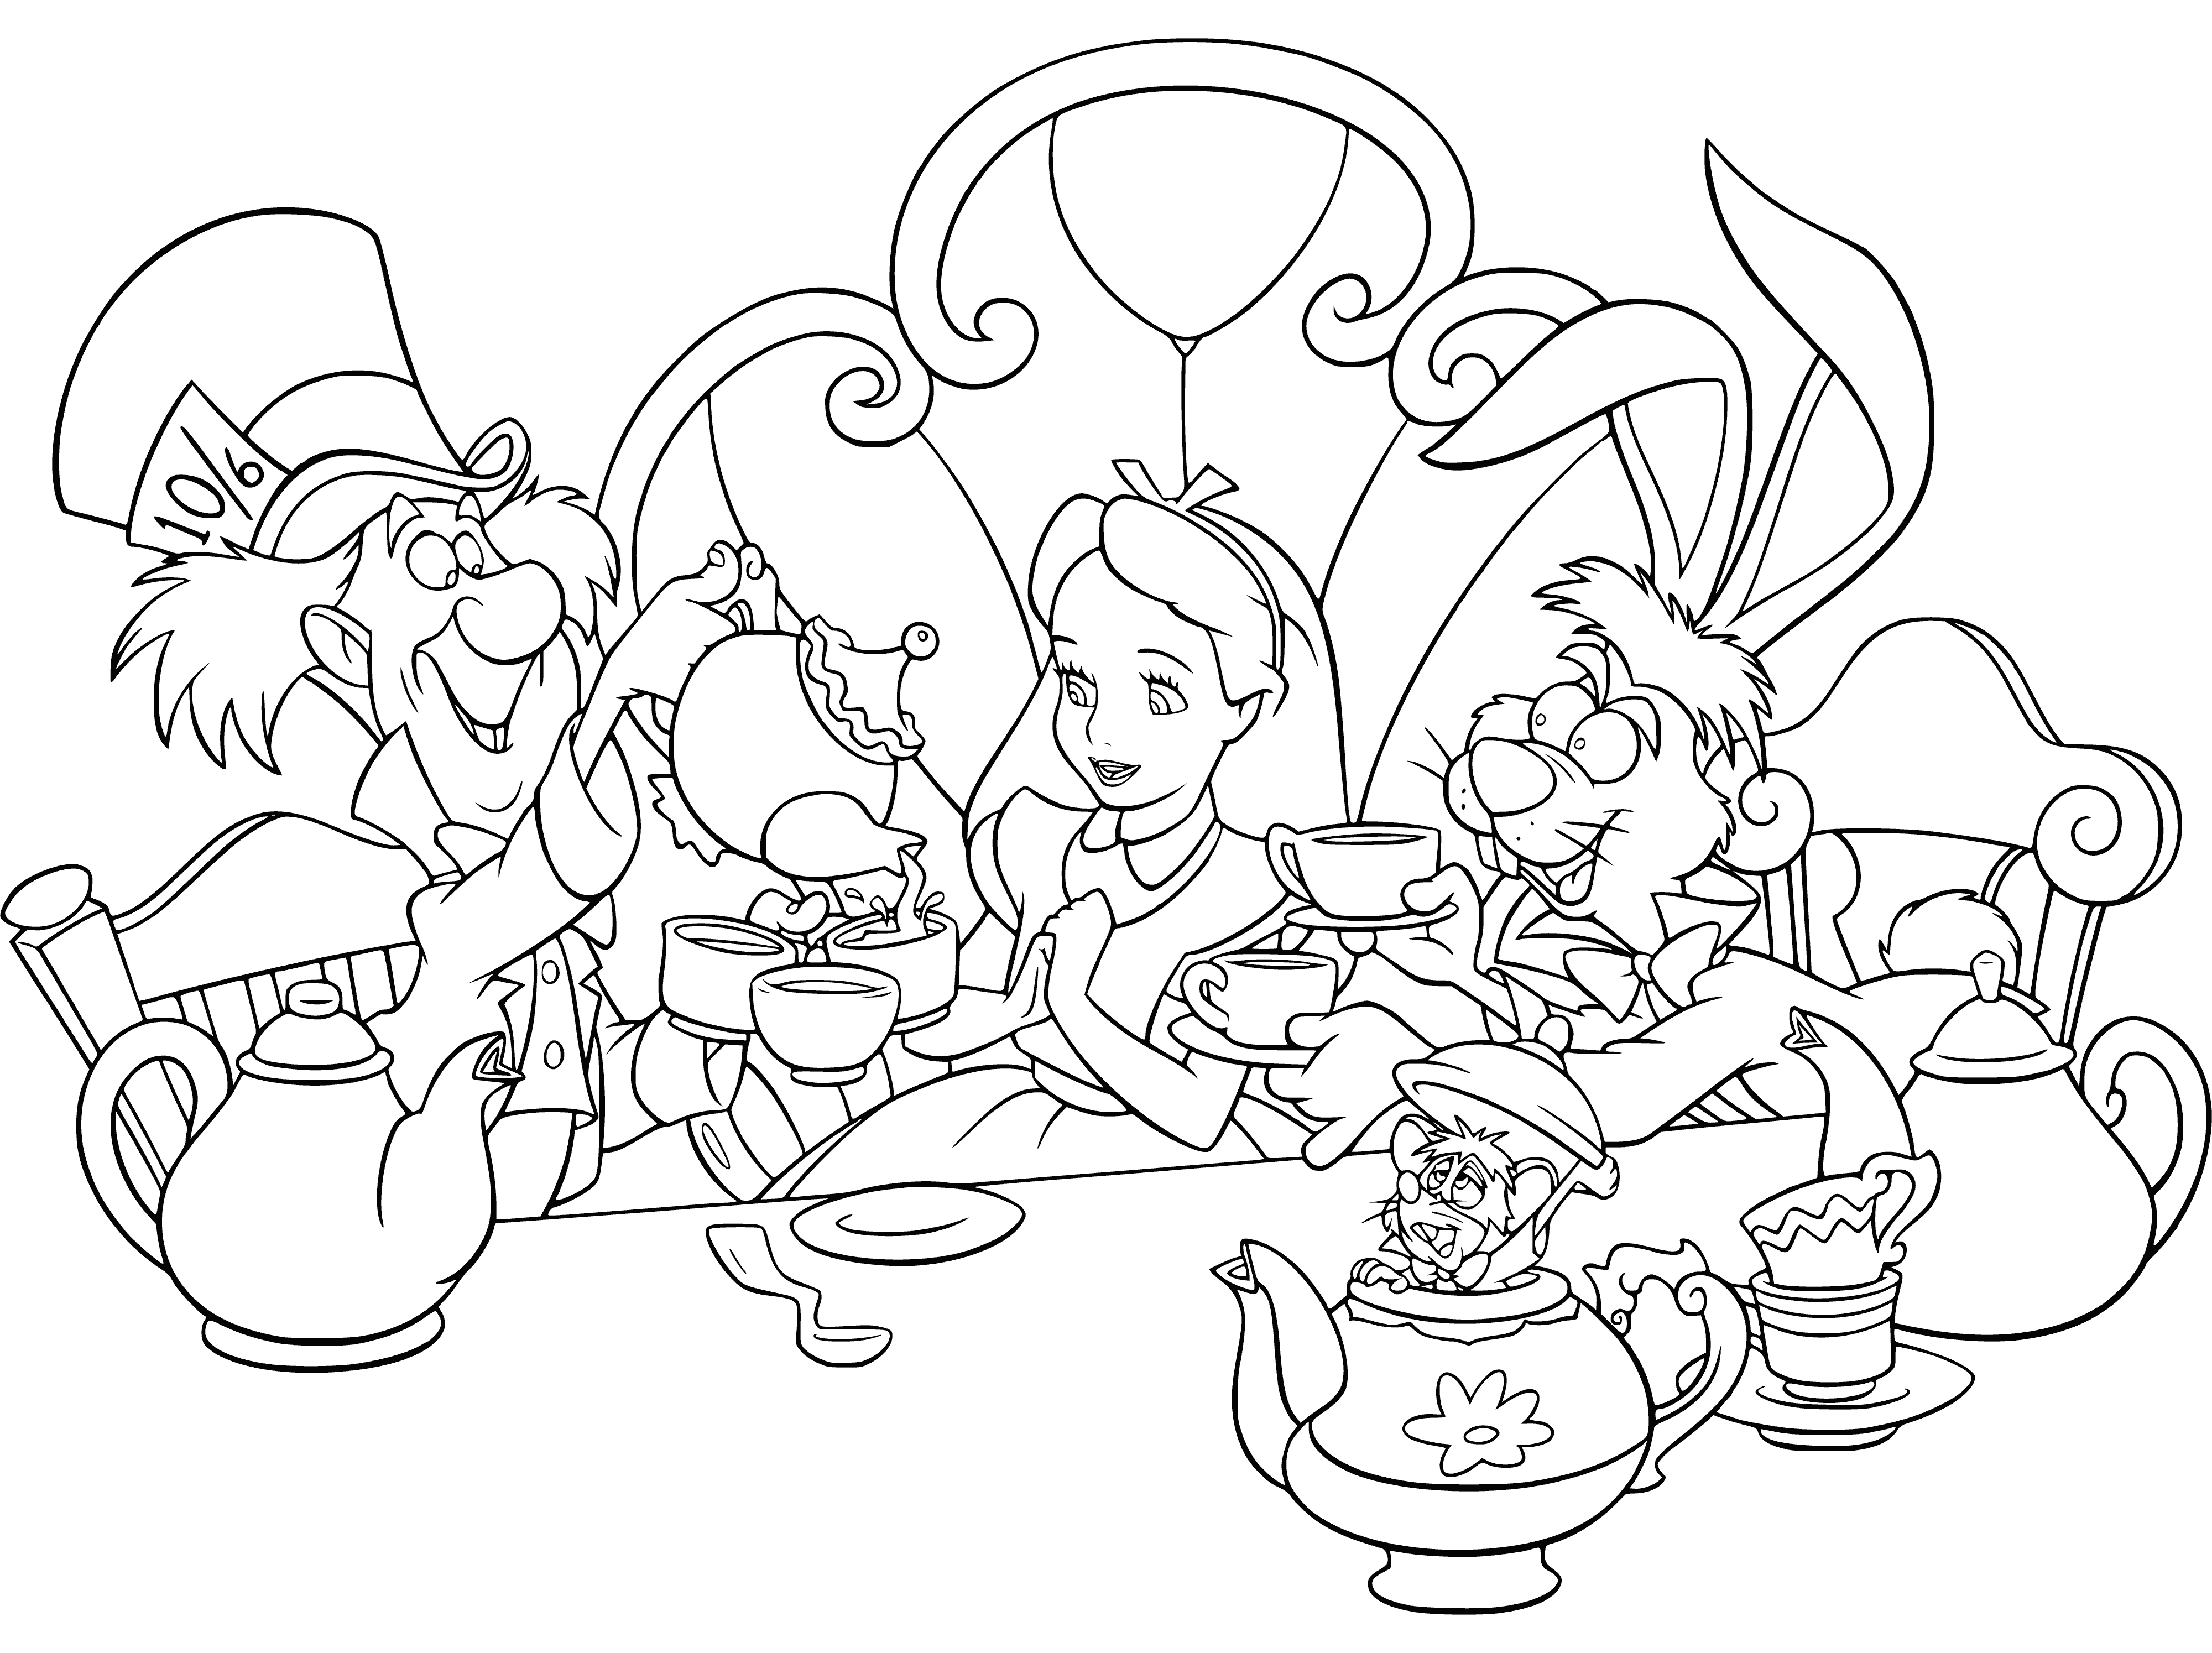 Tea drinking coloring page